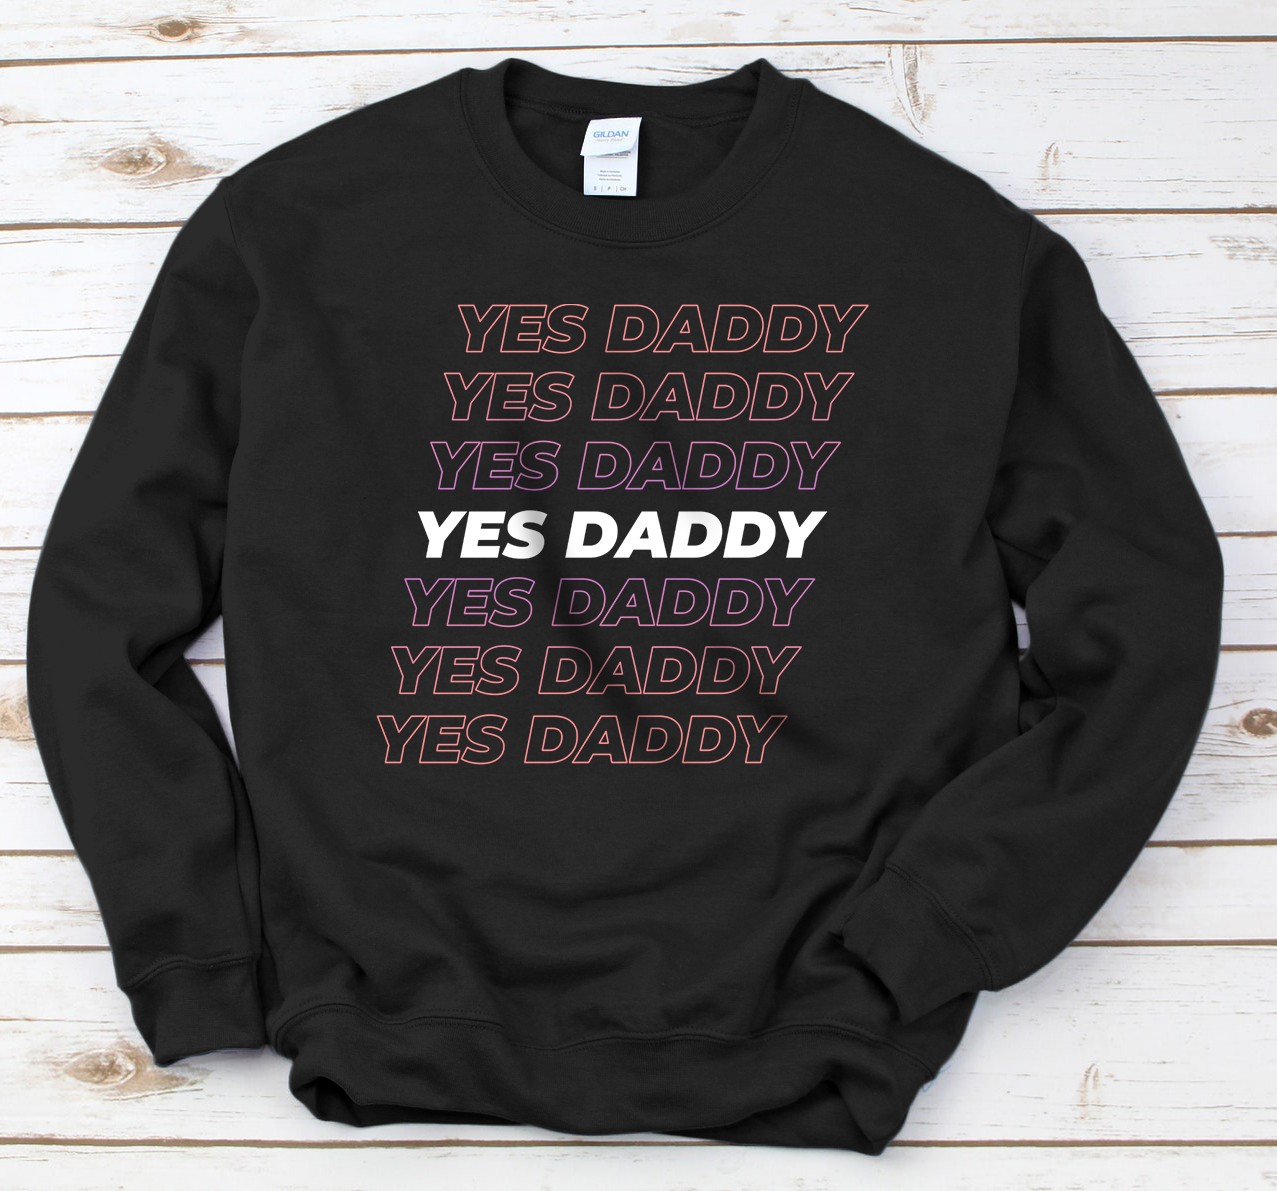 Personalized DDLG Baby Girl BDSM Age Play Yes Daddy Sweatshirt